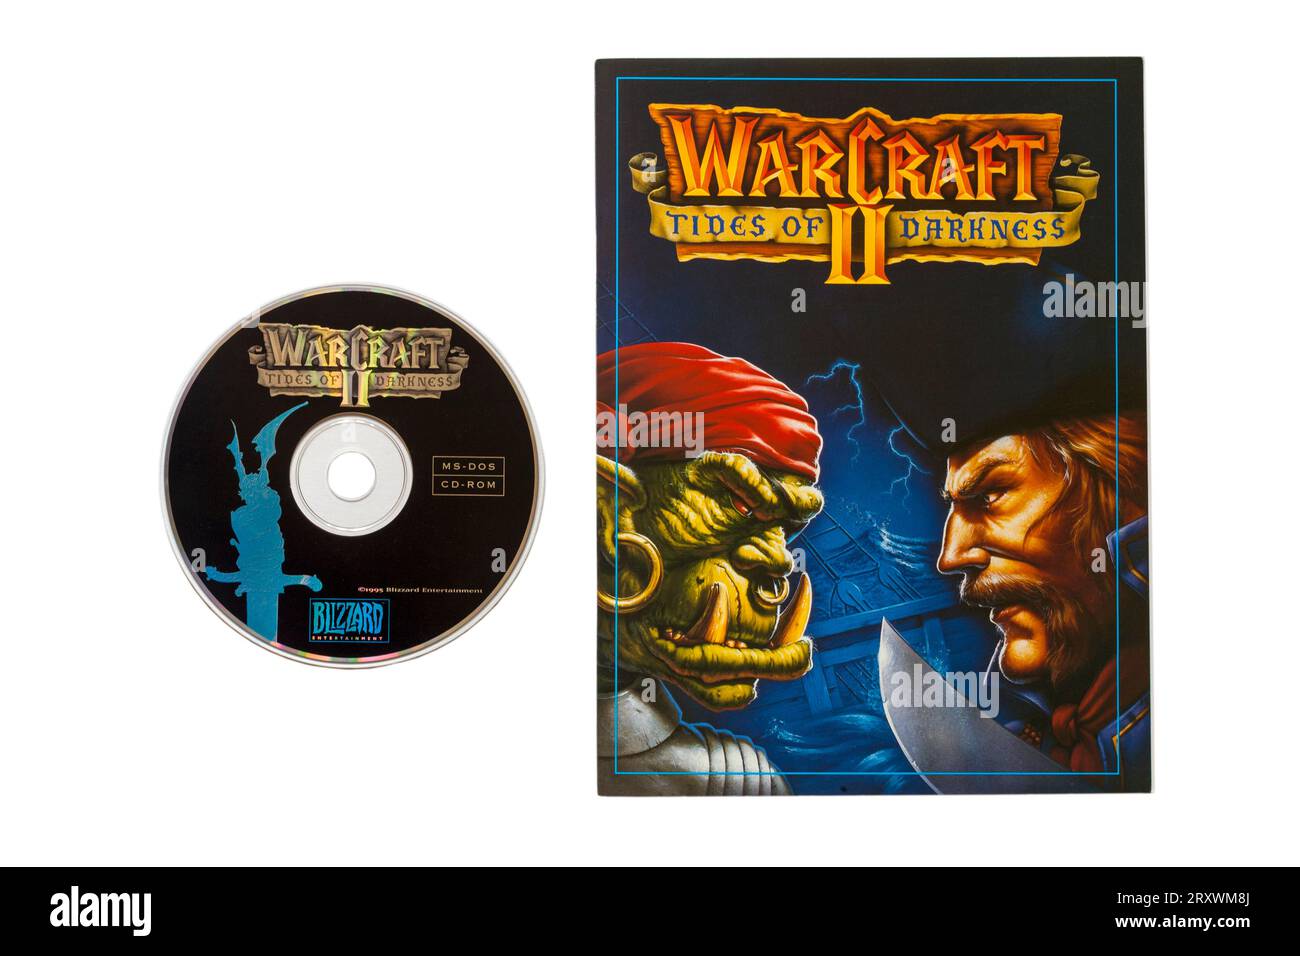 Warcraft II Tides of Darkness deluxe-edition computer game, book and disc isolated on white background Stock Photo